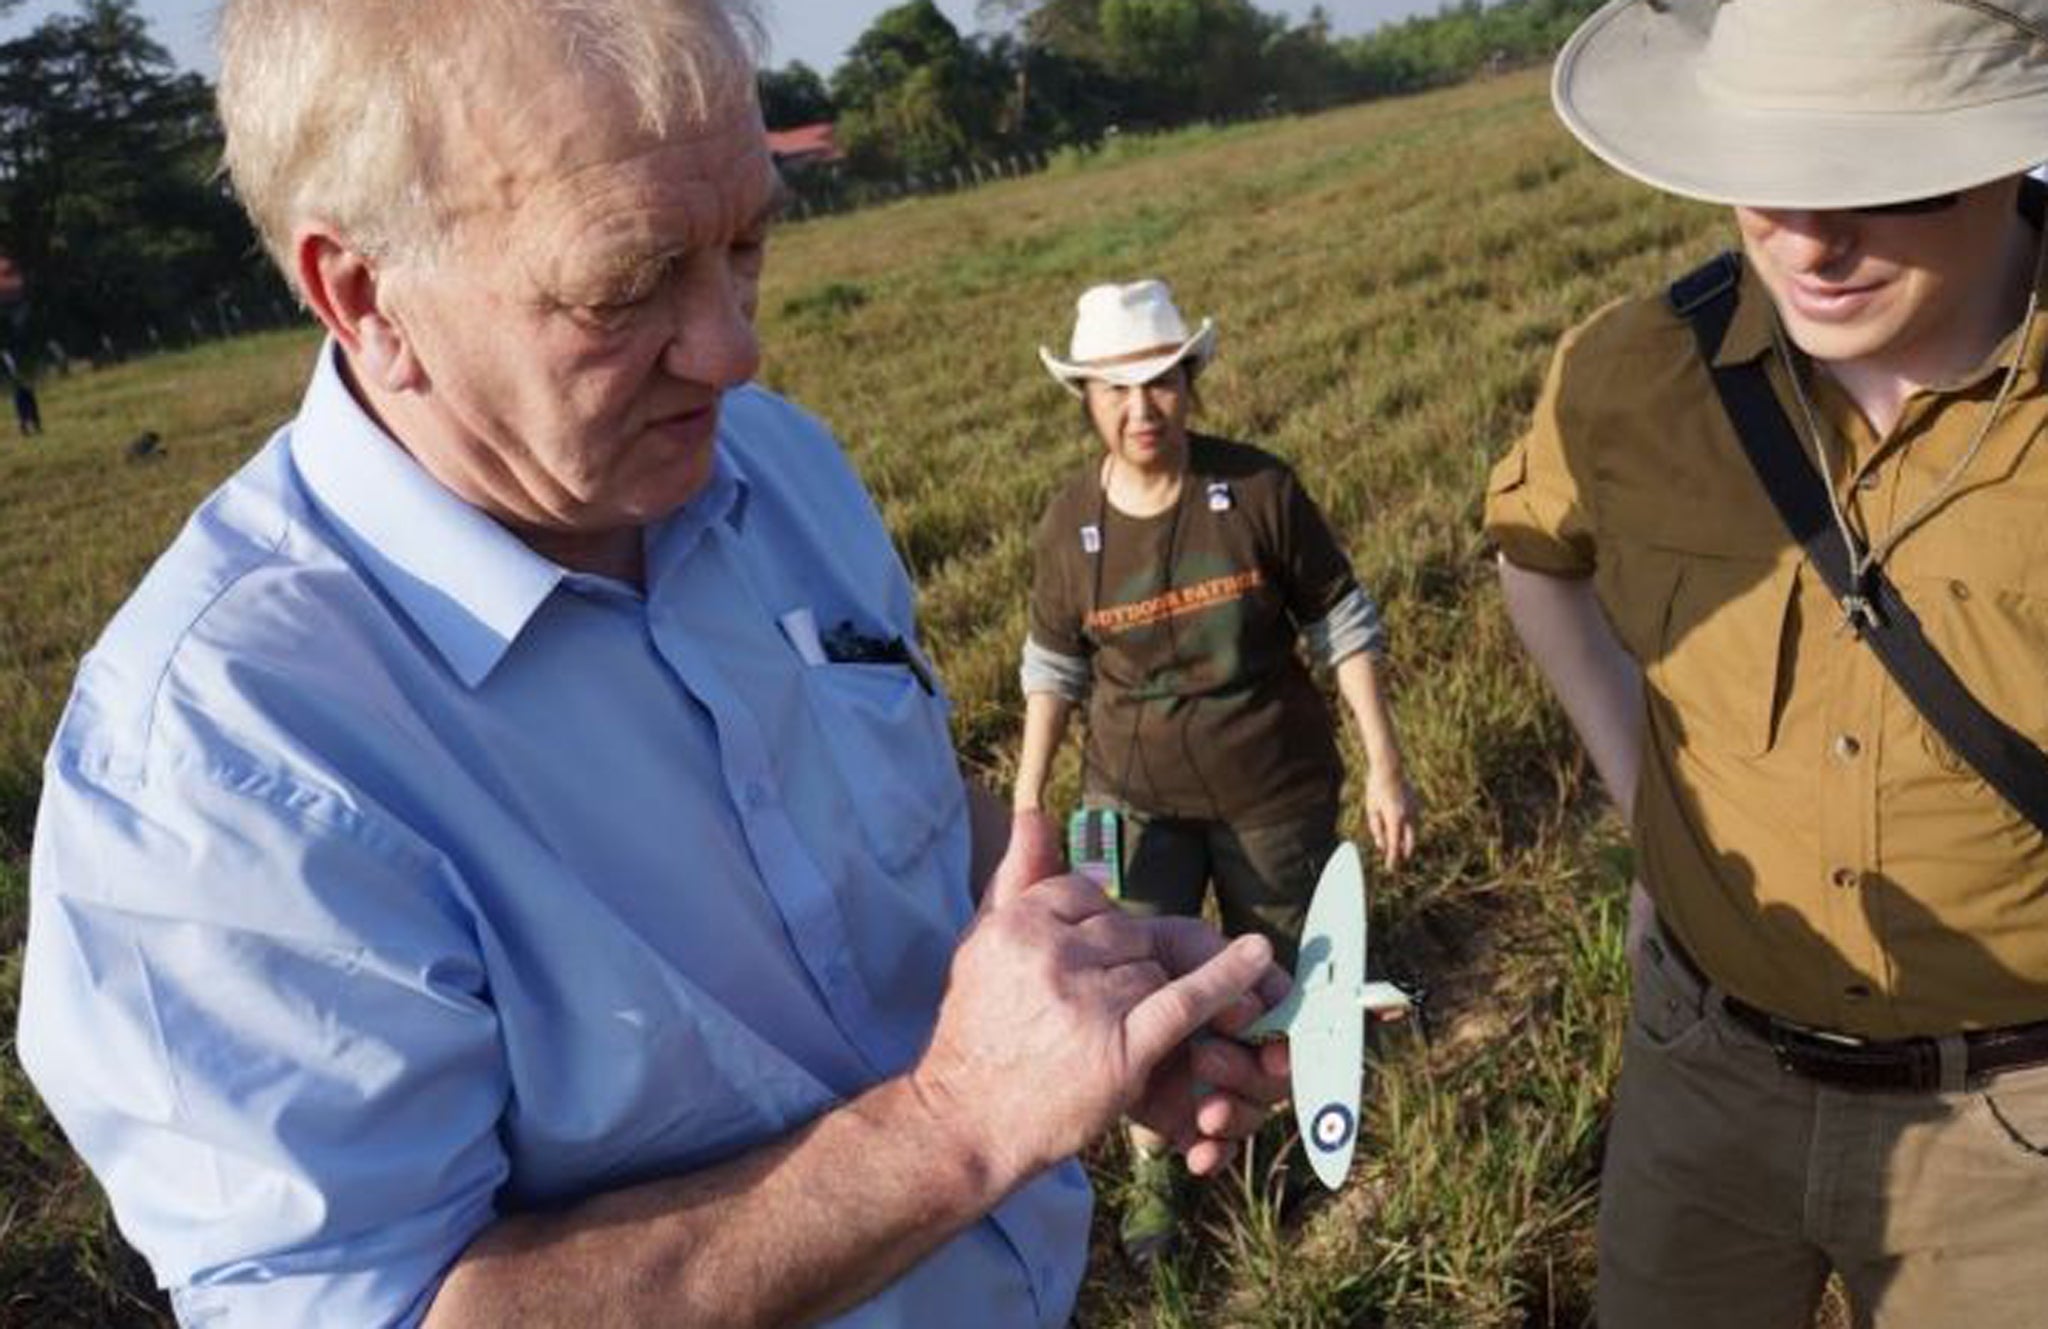 David Cundell holds a model Spitfire as he inspects a field in Burma earlier this month